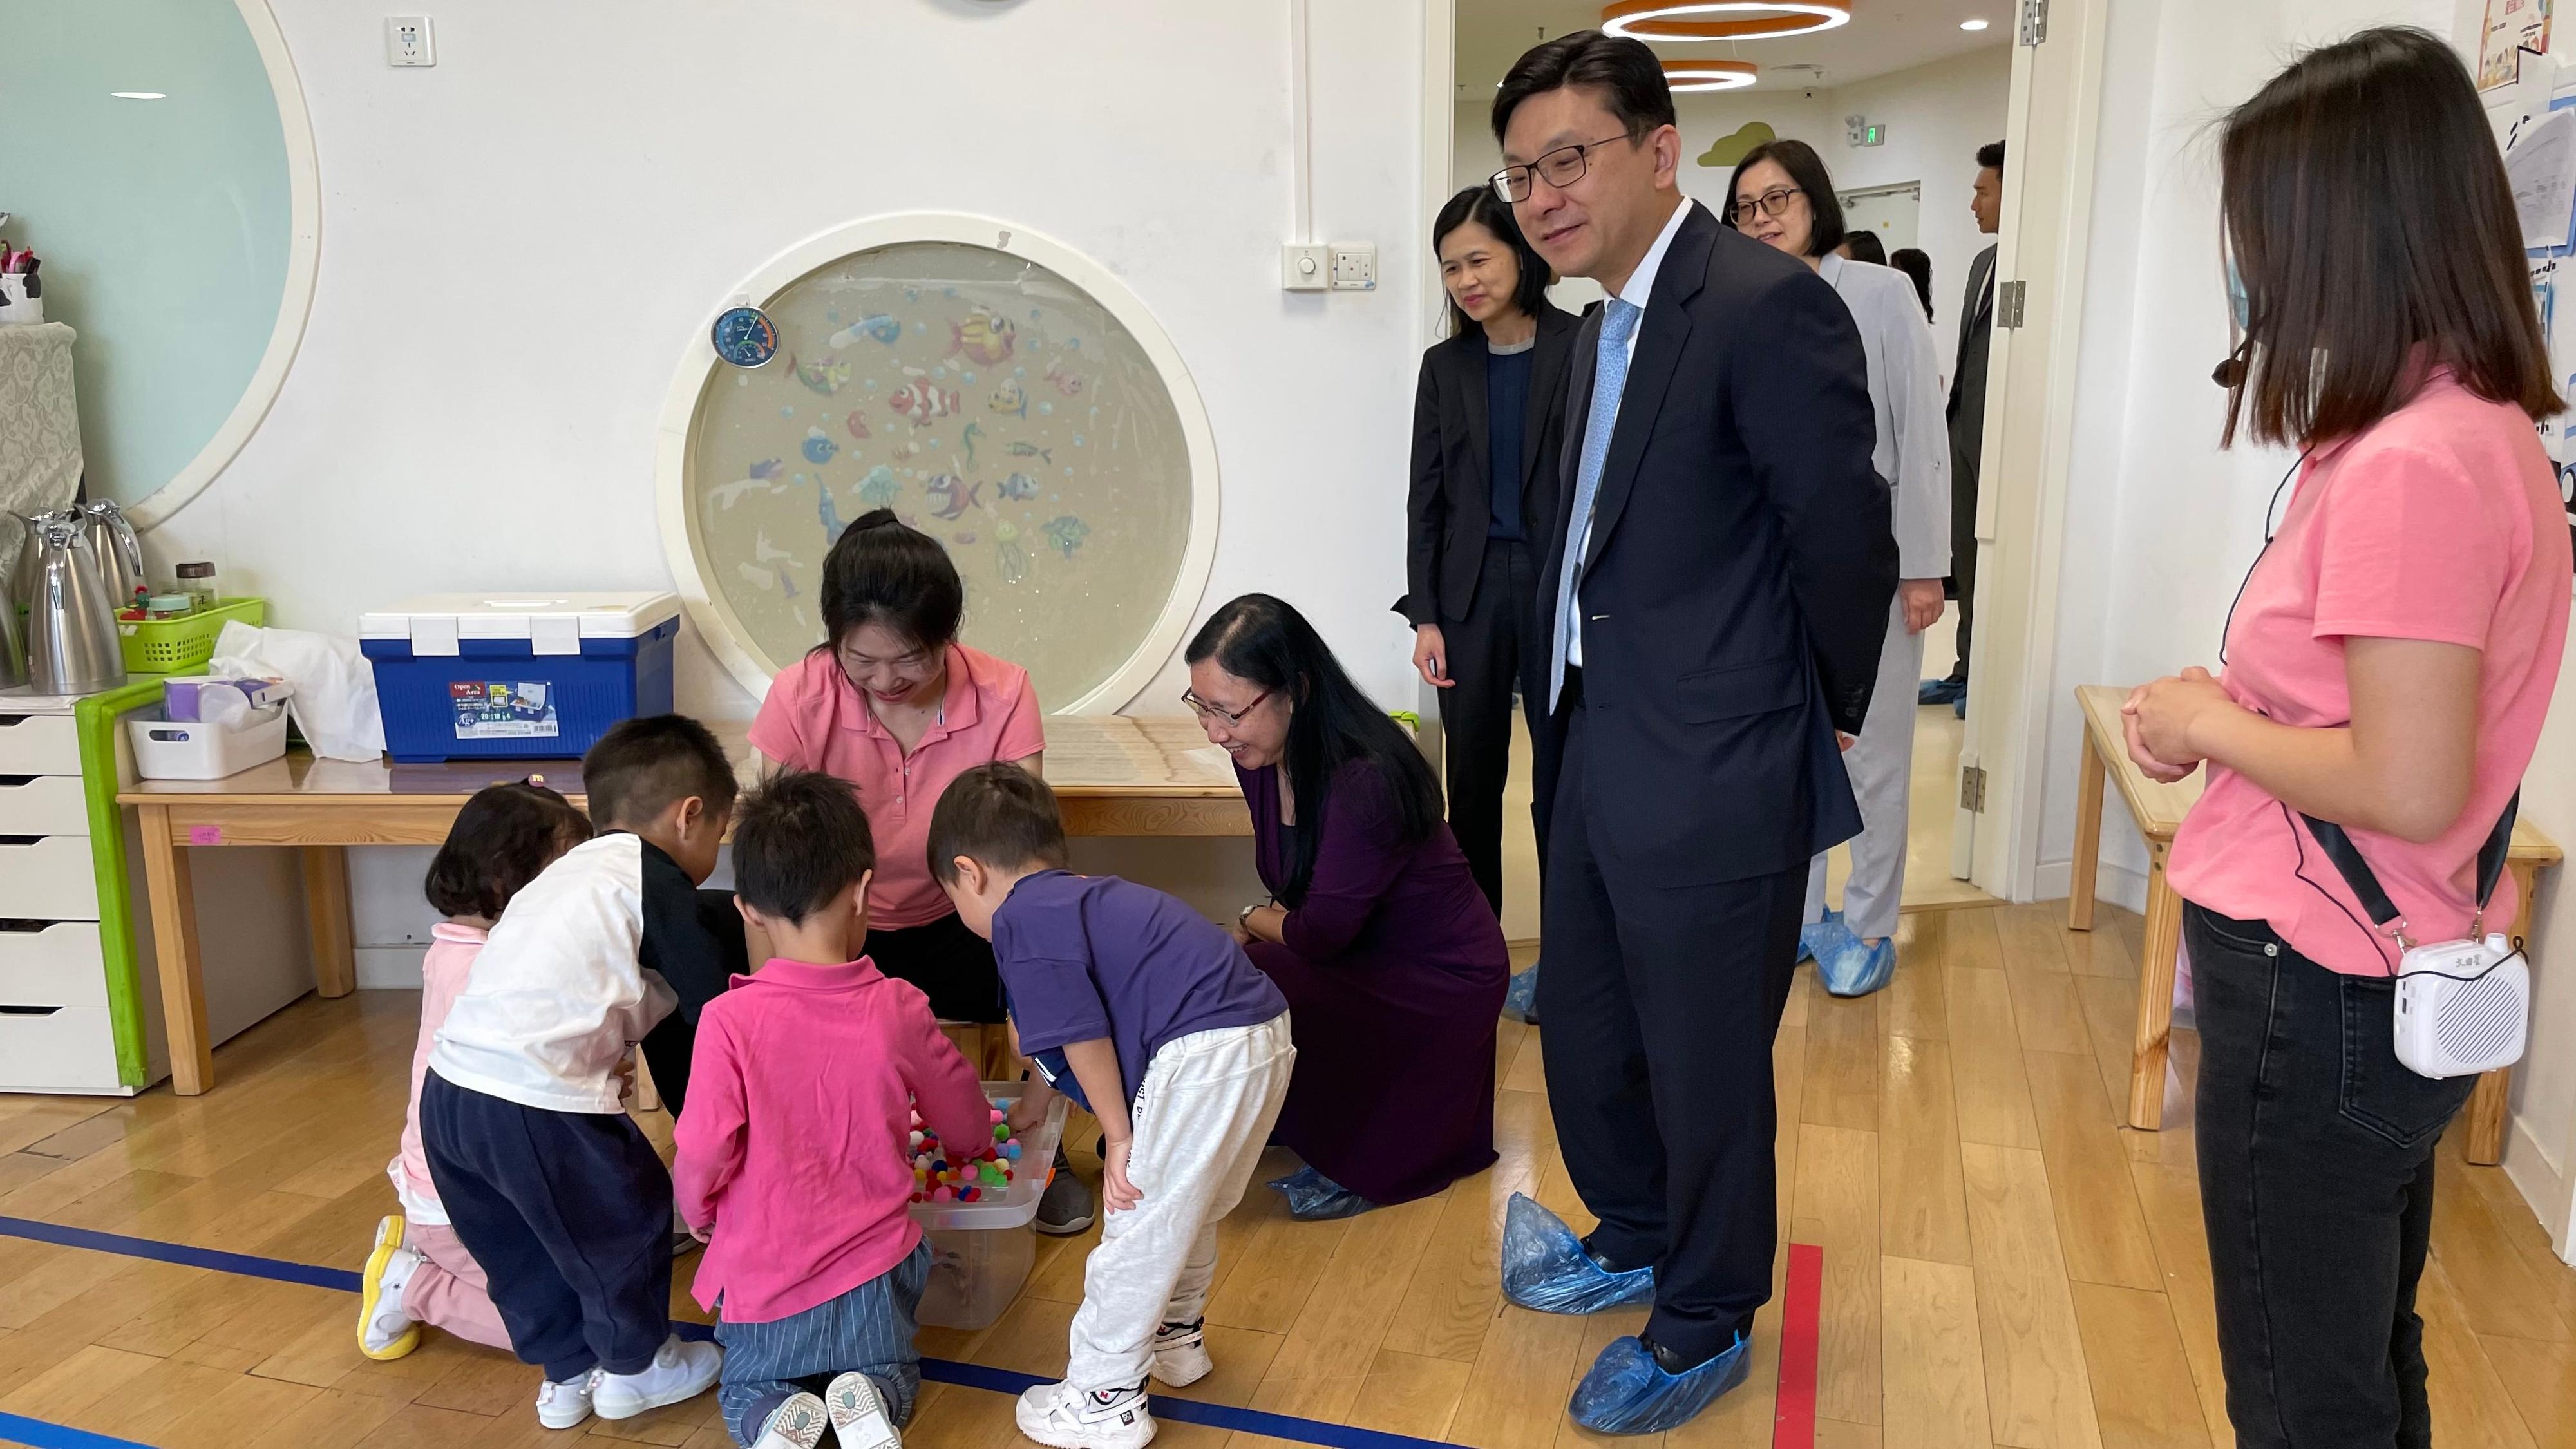 The Secretary for Labour and Welfare, Mr Chris Sun, today (May 9) continued his visit in Beijing. The Permanent Secretary for Labour and Welfare, Ms Alice Lau, also joined the visit. Photo shows Mr Sun (standing, second right) and Ms Lau (kneeling, first right) watching children receiving care services while playing, during their visit to an occasional child care facility in Beijing this morning.